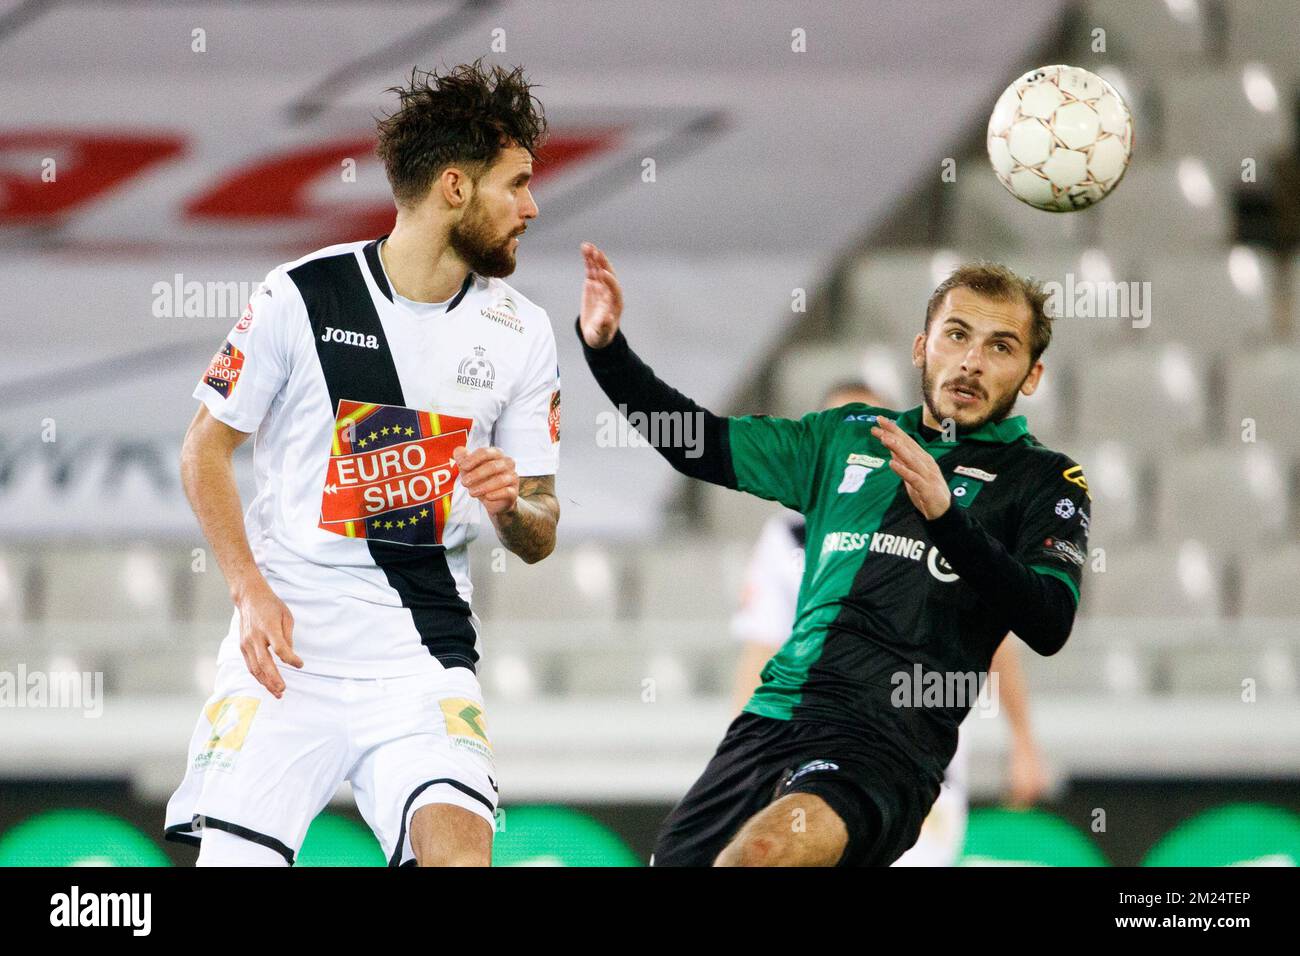 Roeselare's Thibaut Van Acker and Cercle's Thomas Jutten fight for the ball during the Proximus League match of D1B between Cercle Brugge KSV and KSV Roeselare, in Brugge, Saturday 28 January 2017, on day 24 of the Belgian soccer championship, division 1B. BELGA PHOTO KURT DESPLENTER Stock Photo